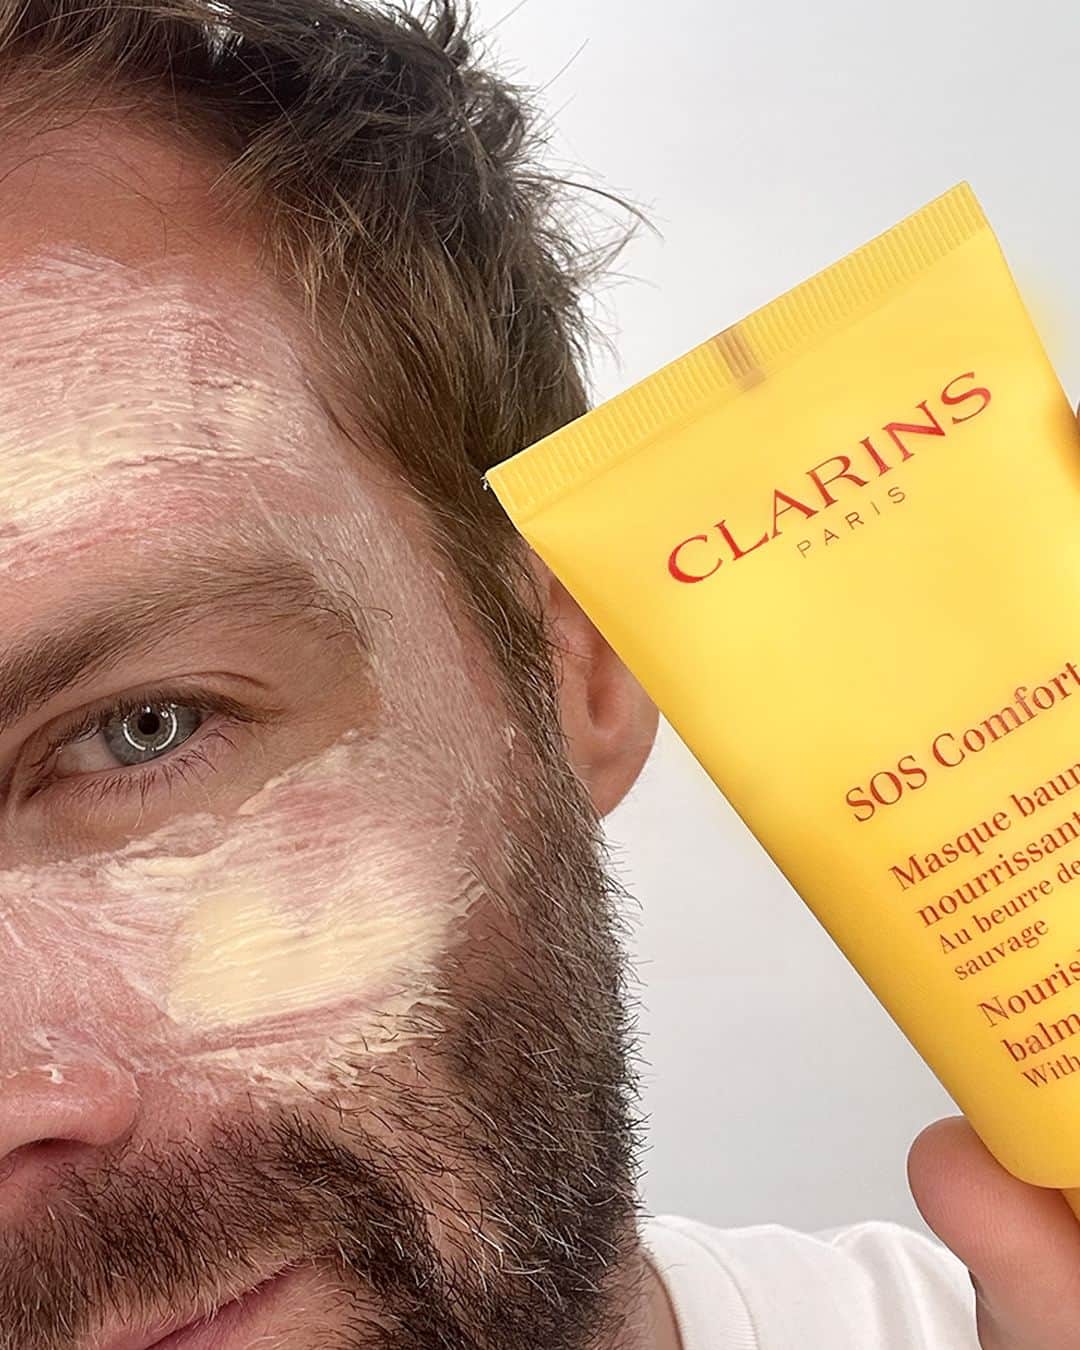 Clarins Canadaのインスタグラム：「Mask therapy! If you need instant skin results, reach for the dedicated Clarins face mask: ✨ SOS Comfort to soothe dry skin ✨ SOS Hydra to boost hydration ✨ SOS Pure to fight imperfections __________ Thérapie de masque ! Si vous avez besoin de résultats instantanés pour votre peau, optez pour les masques visage de Clarins : ✨ SOS Comfort pour apaiser la peau sèche ✨ SOS Hydra pour un boost d'hydratation  ✨ SOS Pure pour combattre les imperfections . . . #Clarins #FaceMask #Mask」